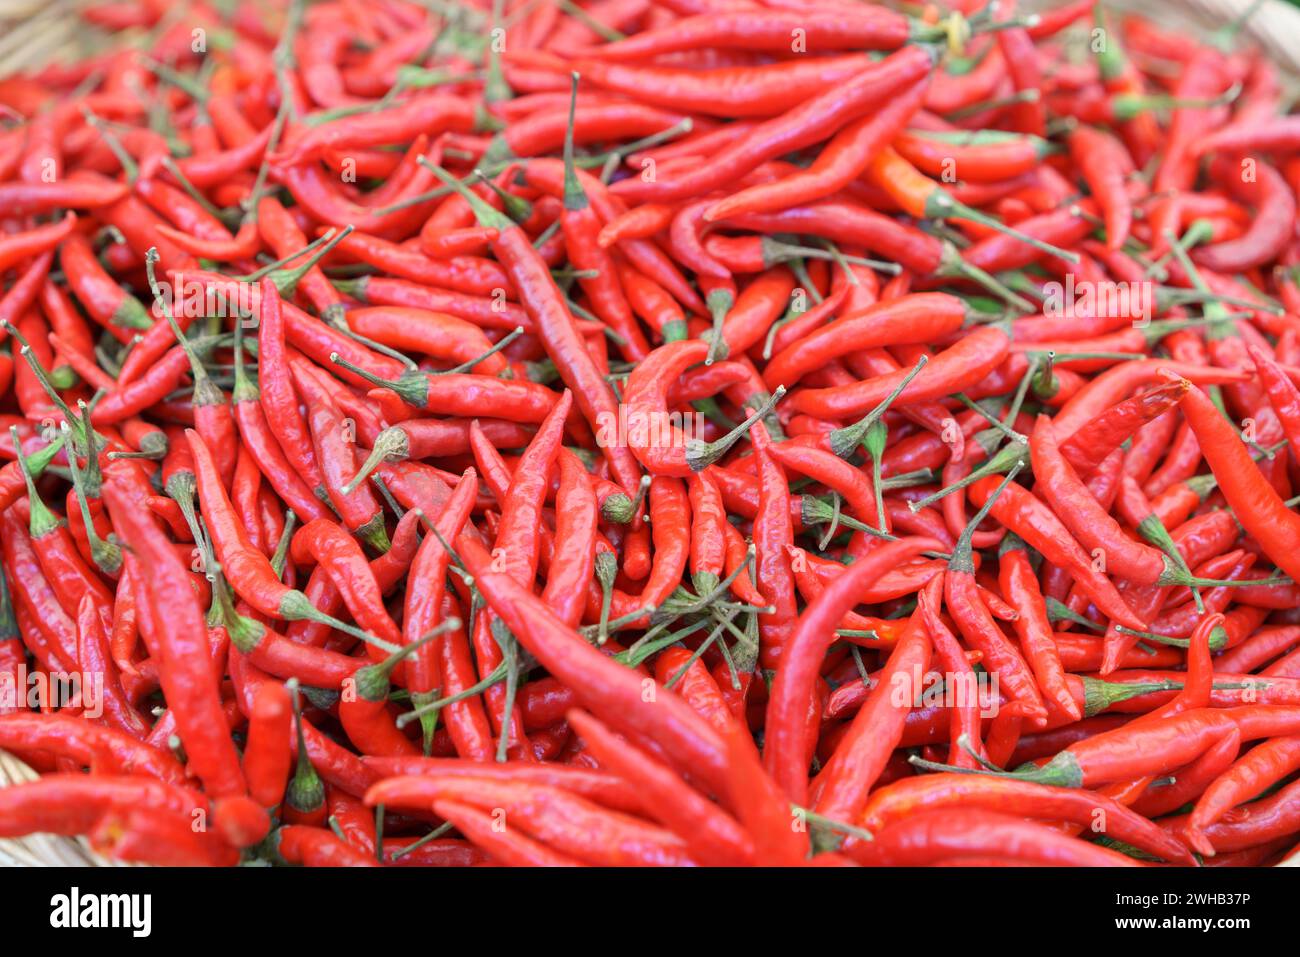 A close-up shot of a basket overflowing with vibrant red chili peppers, symbolizing heat and flavor in culinary uses Stock Photo